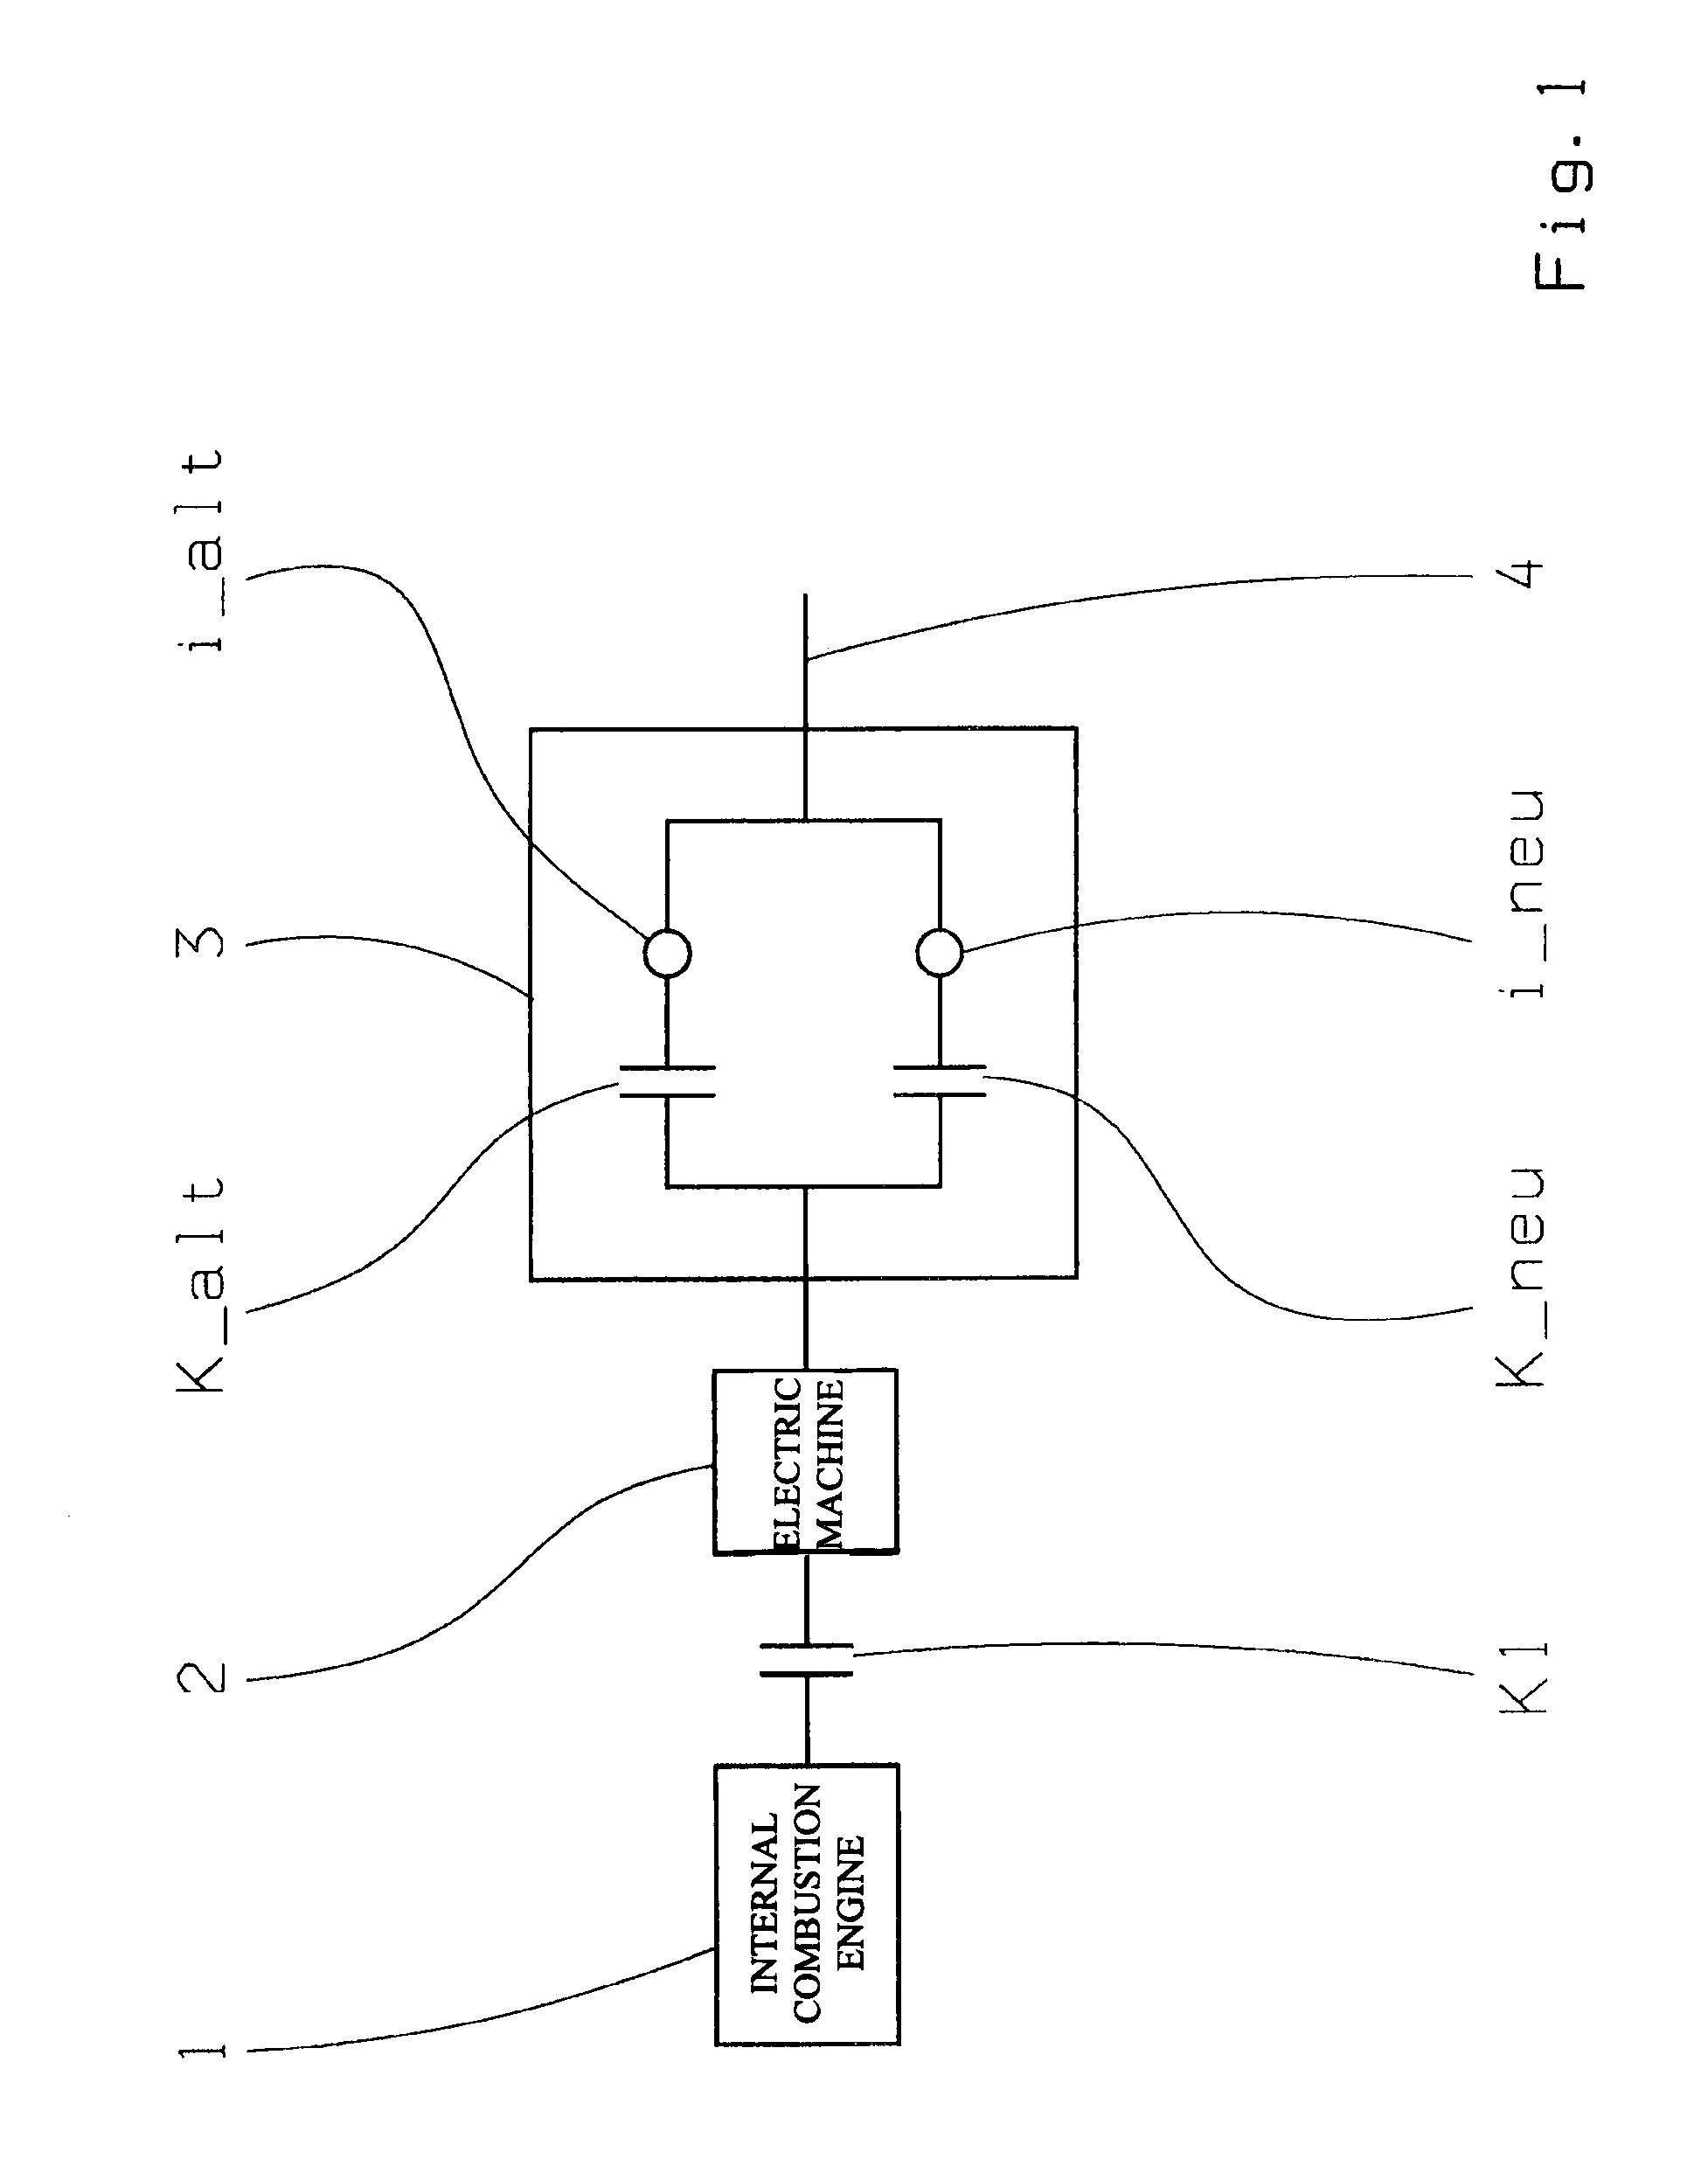 Method for starting the combustion engine during a load shift in parallel hybrid vehicles